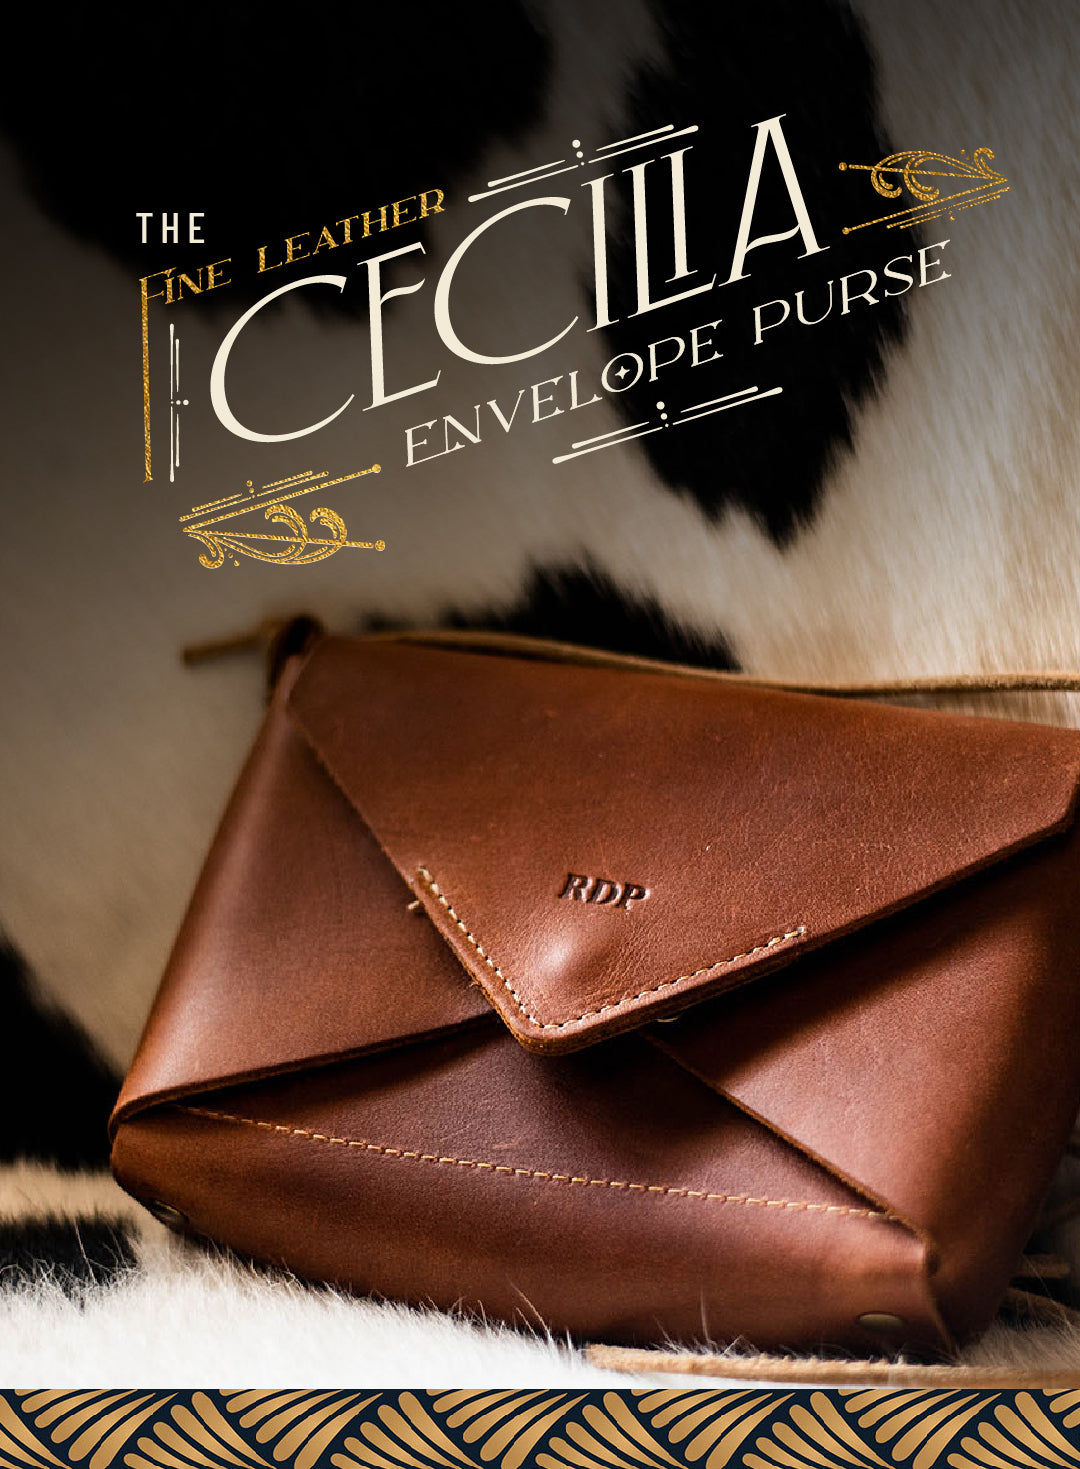 Personalized Leather Envelope Purse Handbag - Made in USA The Cecilia -  Holtz Leather